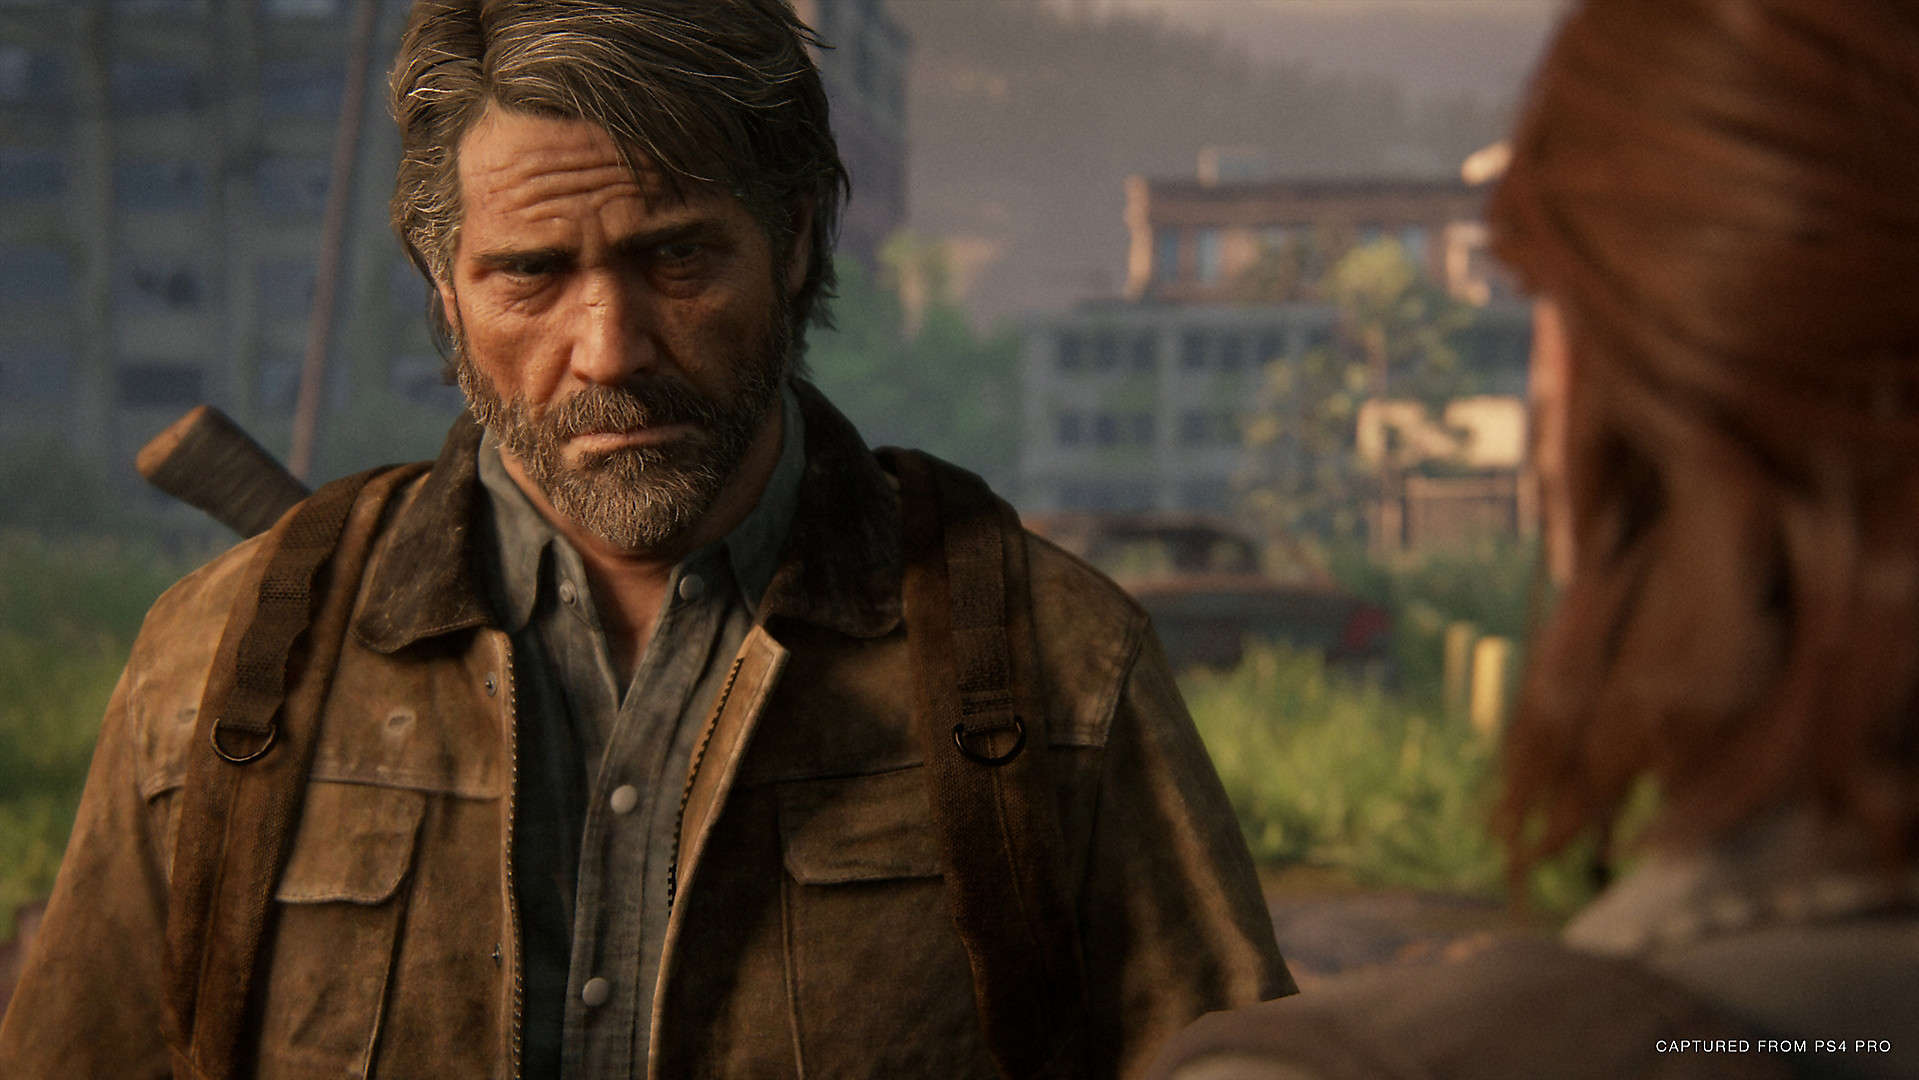 June 2020 NPD: The Last of Us Part II has best U.S. launch month of the  year